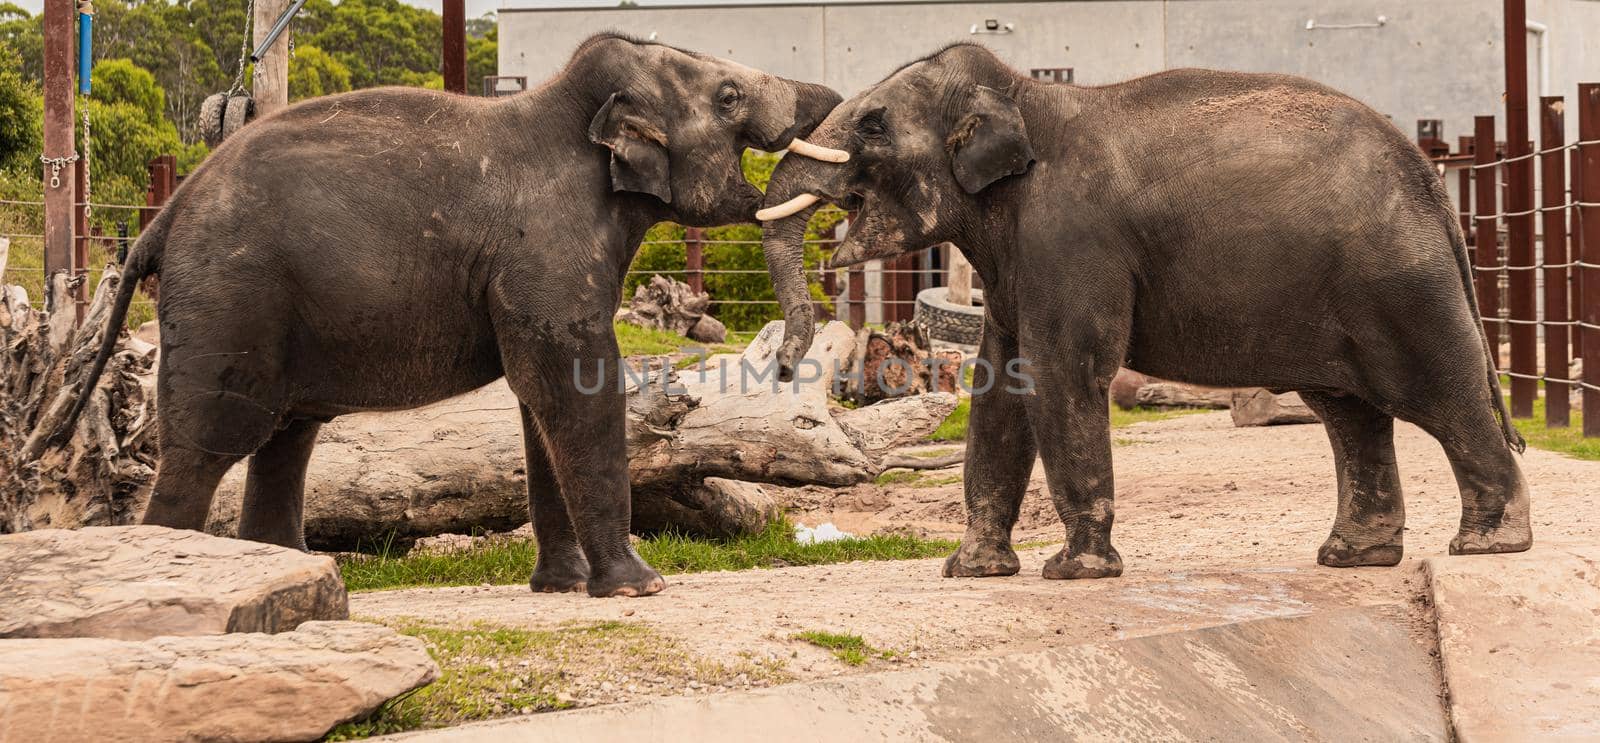 elephants fight, Two young elephants playing in fight